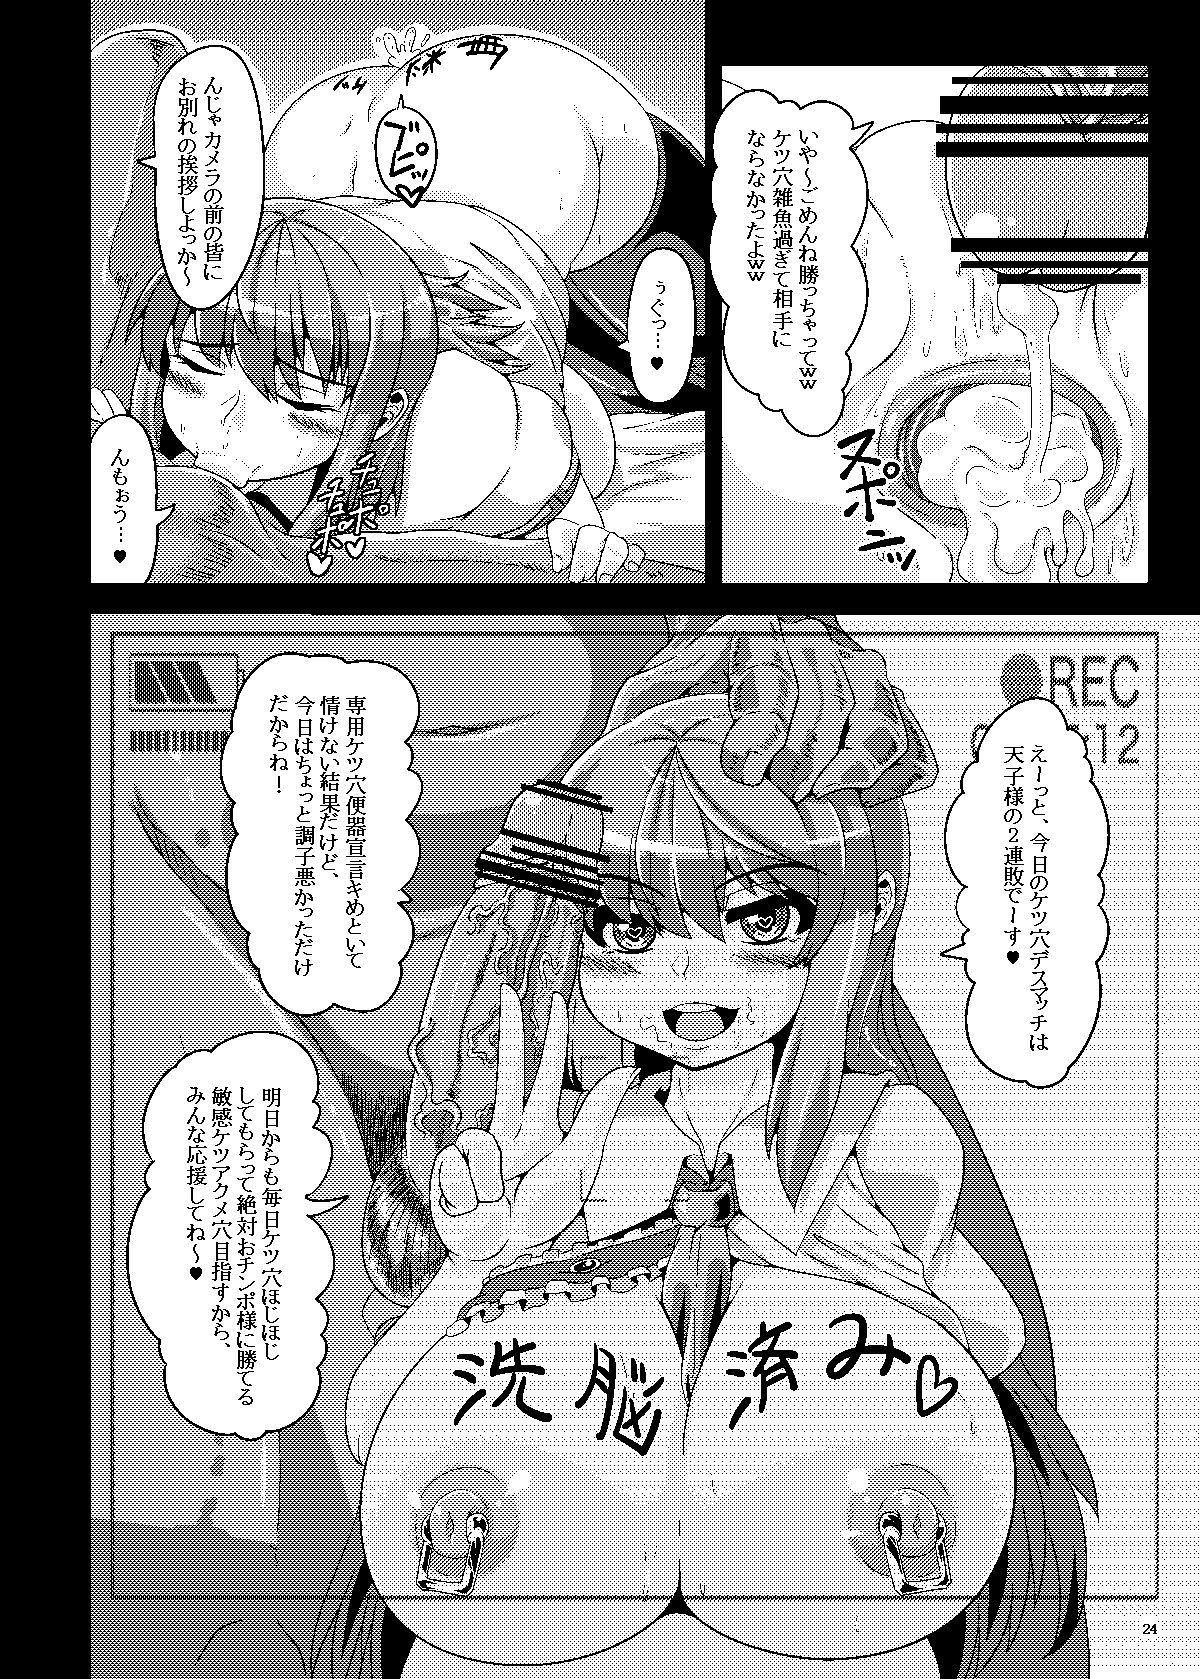 Gaygroup 既刊全ページ公開（2017博麗神社例大祭） - Touhou project Ass Fucking - Page 23